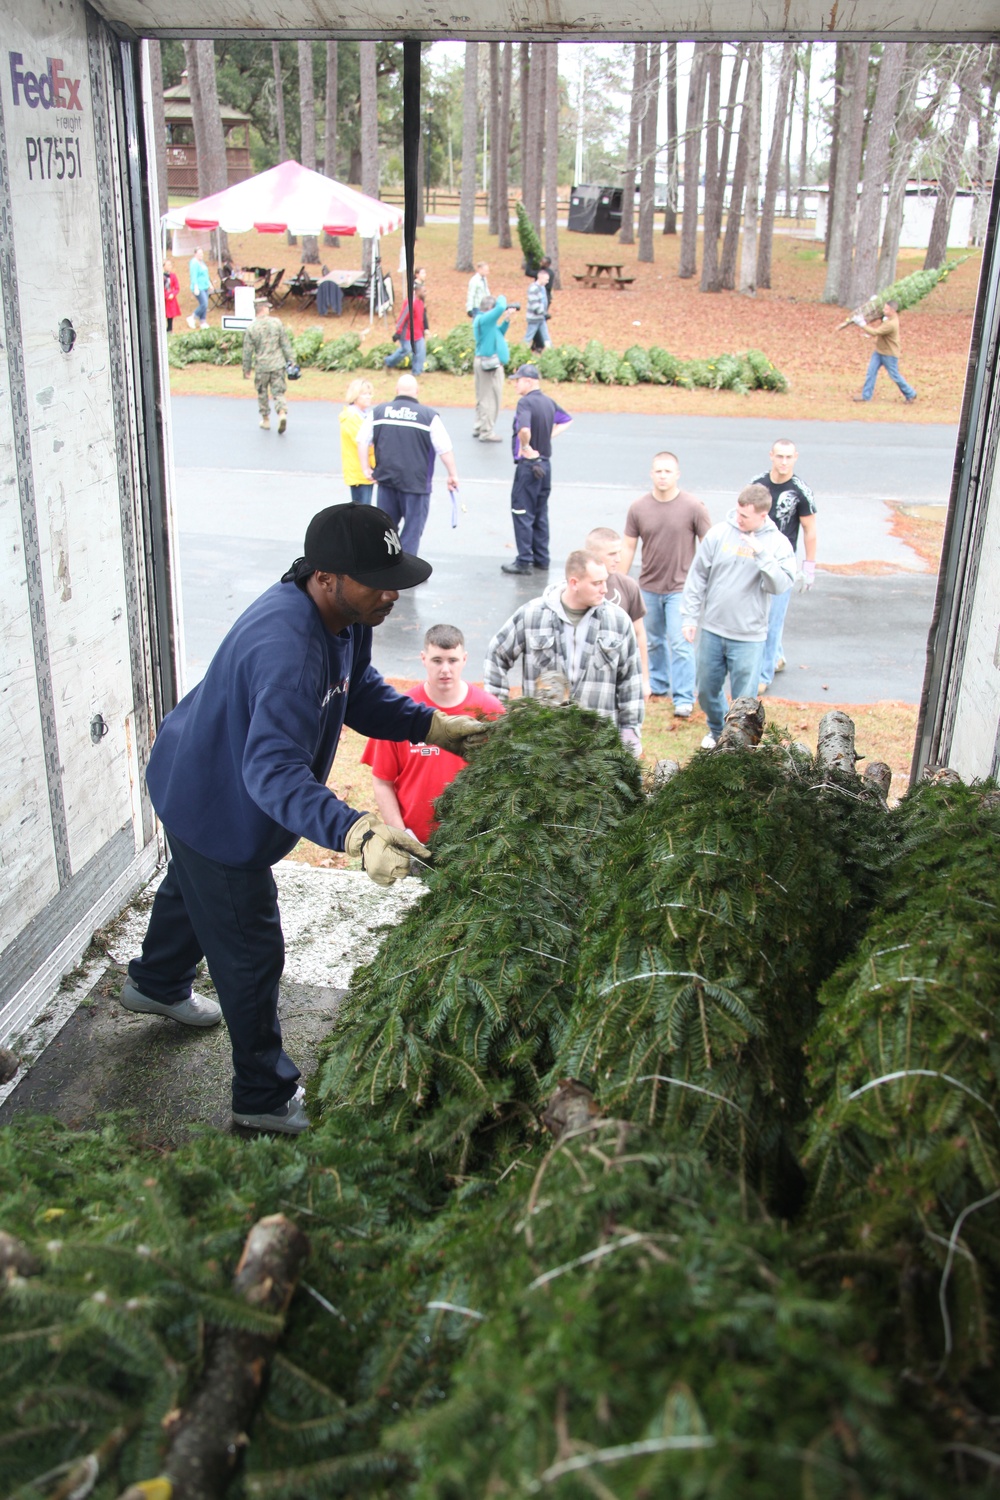 Oh, Christmas tree: Trees for Troops event provides military families with Christmas cheer